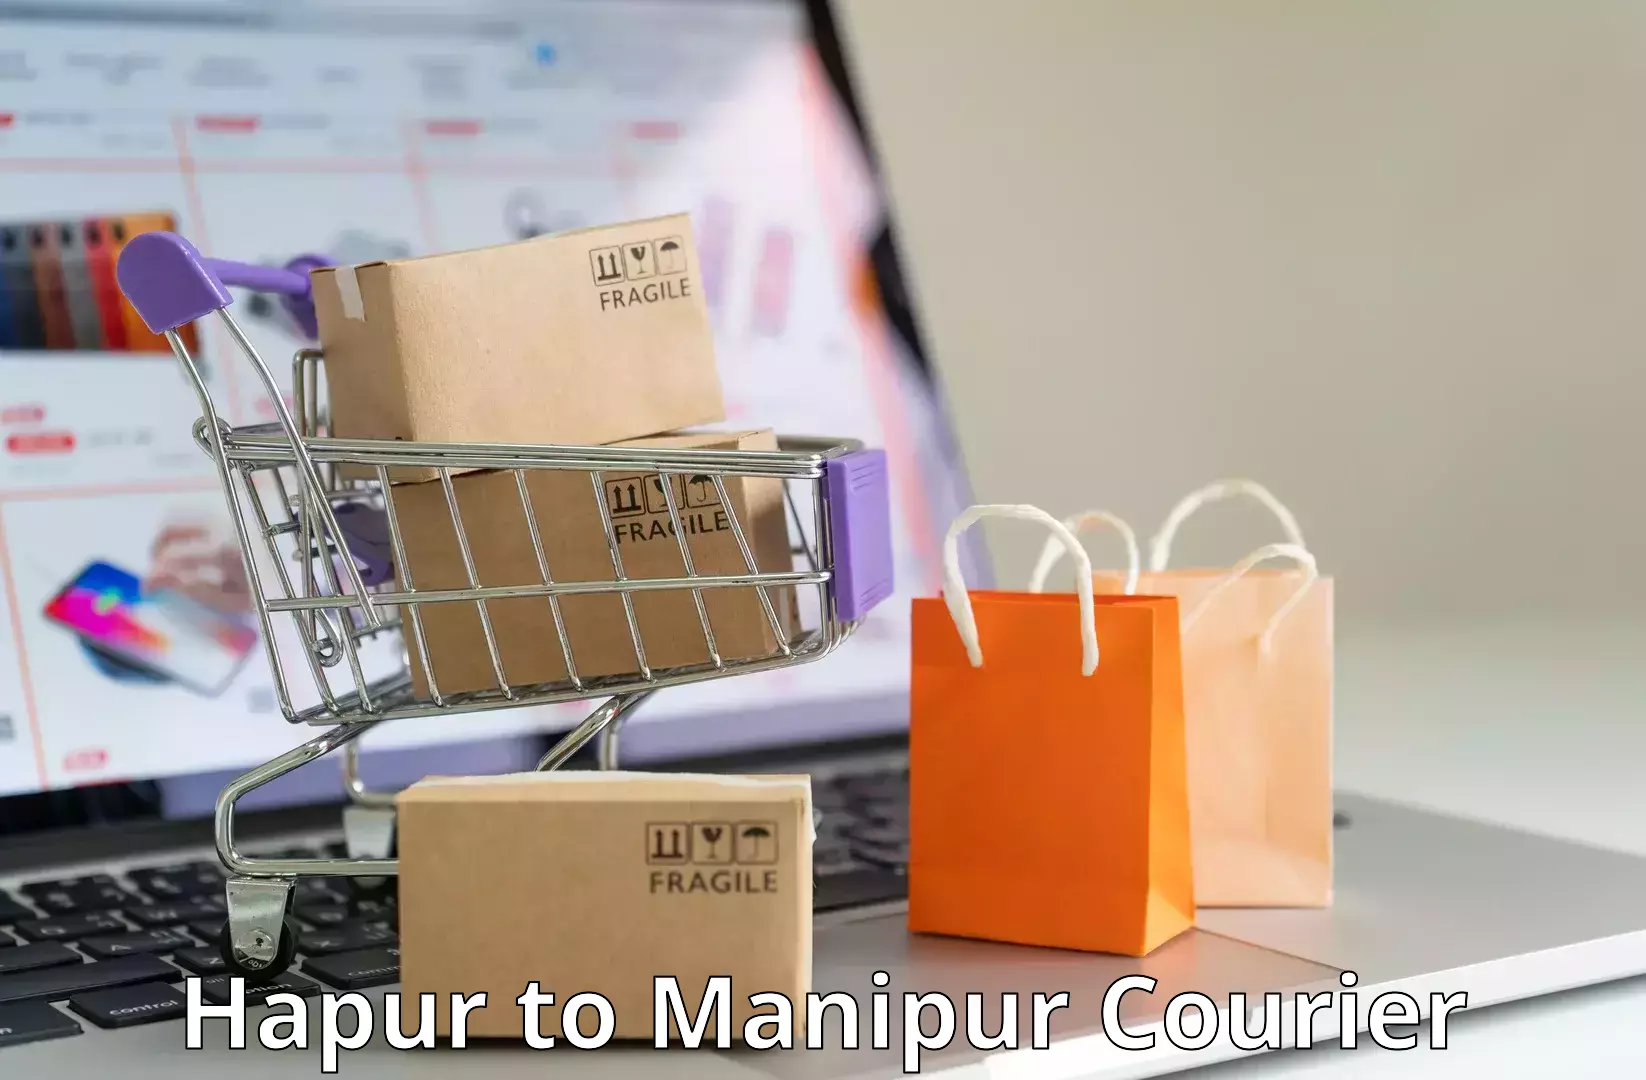 Quality courier partnerships Hapur to Imphal